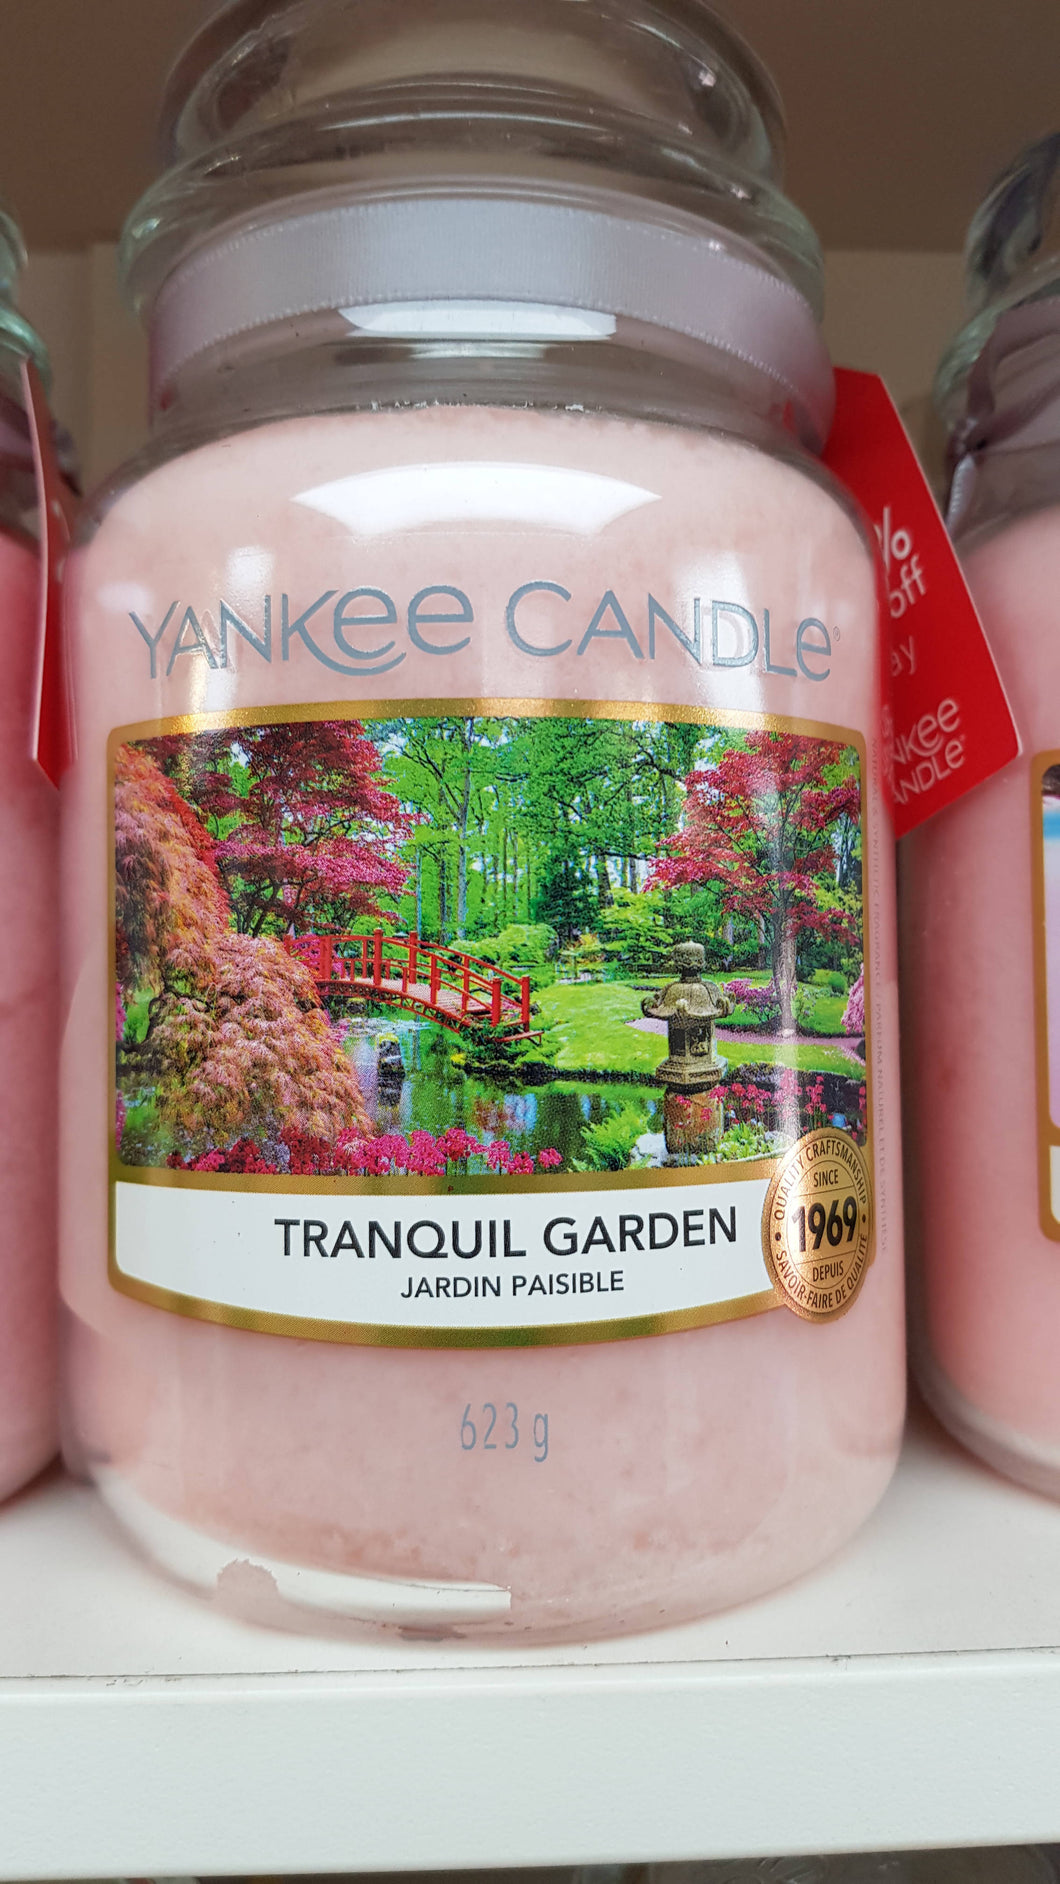 Tranquil Garden Yankee Candle